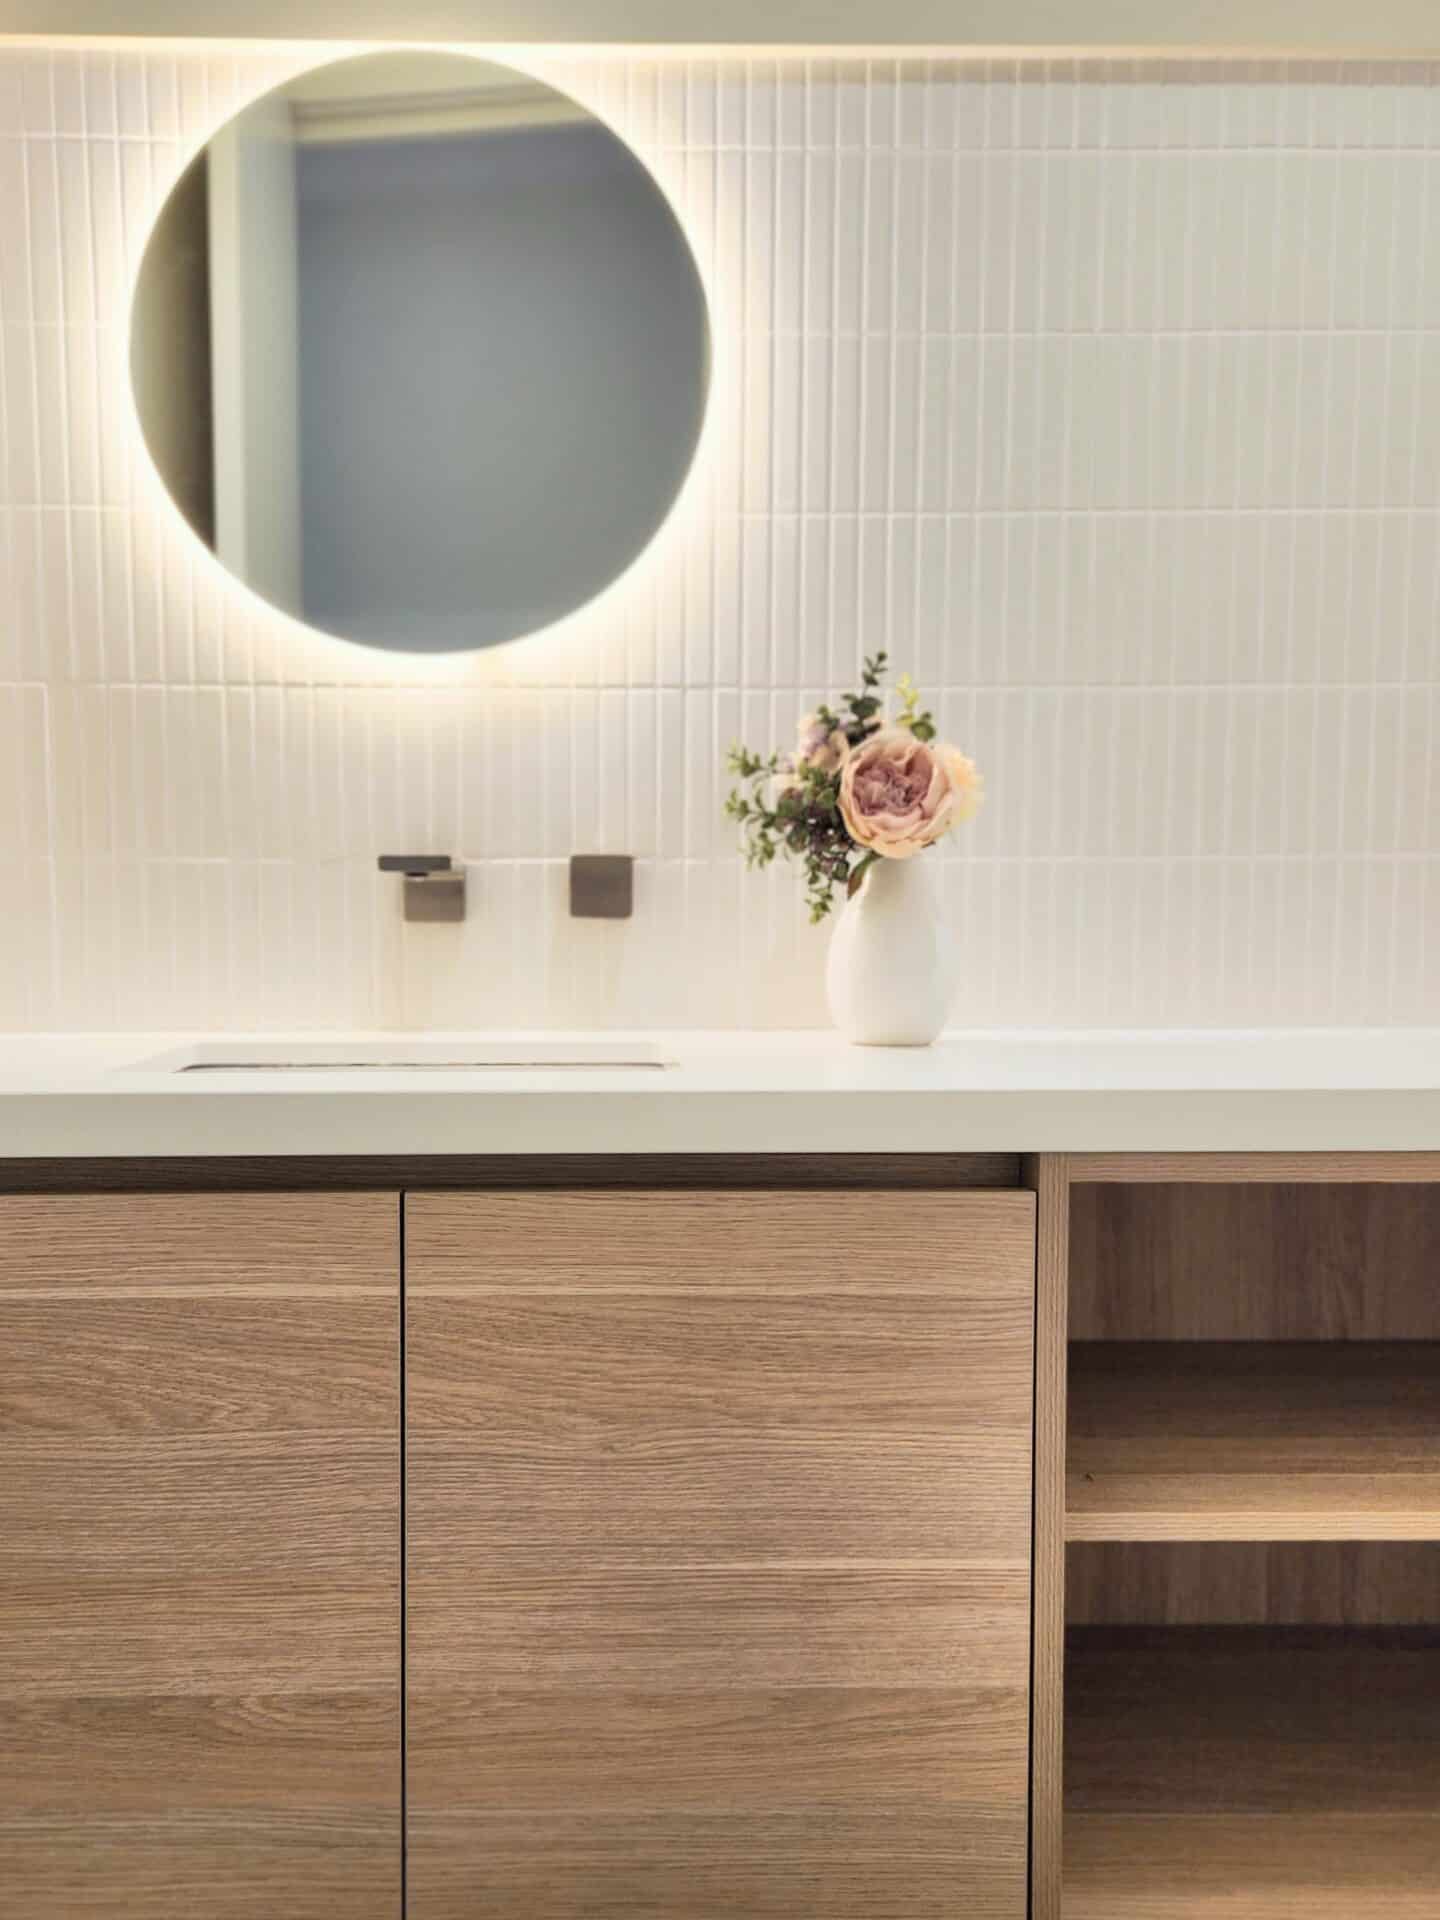 A bathroom vanity with a round mirror above it.